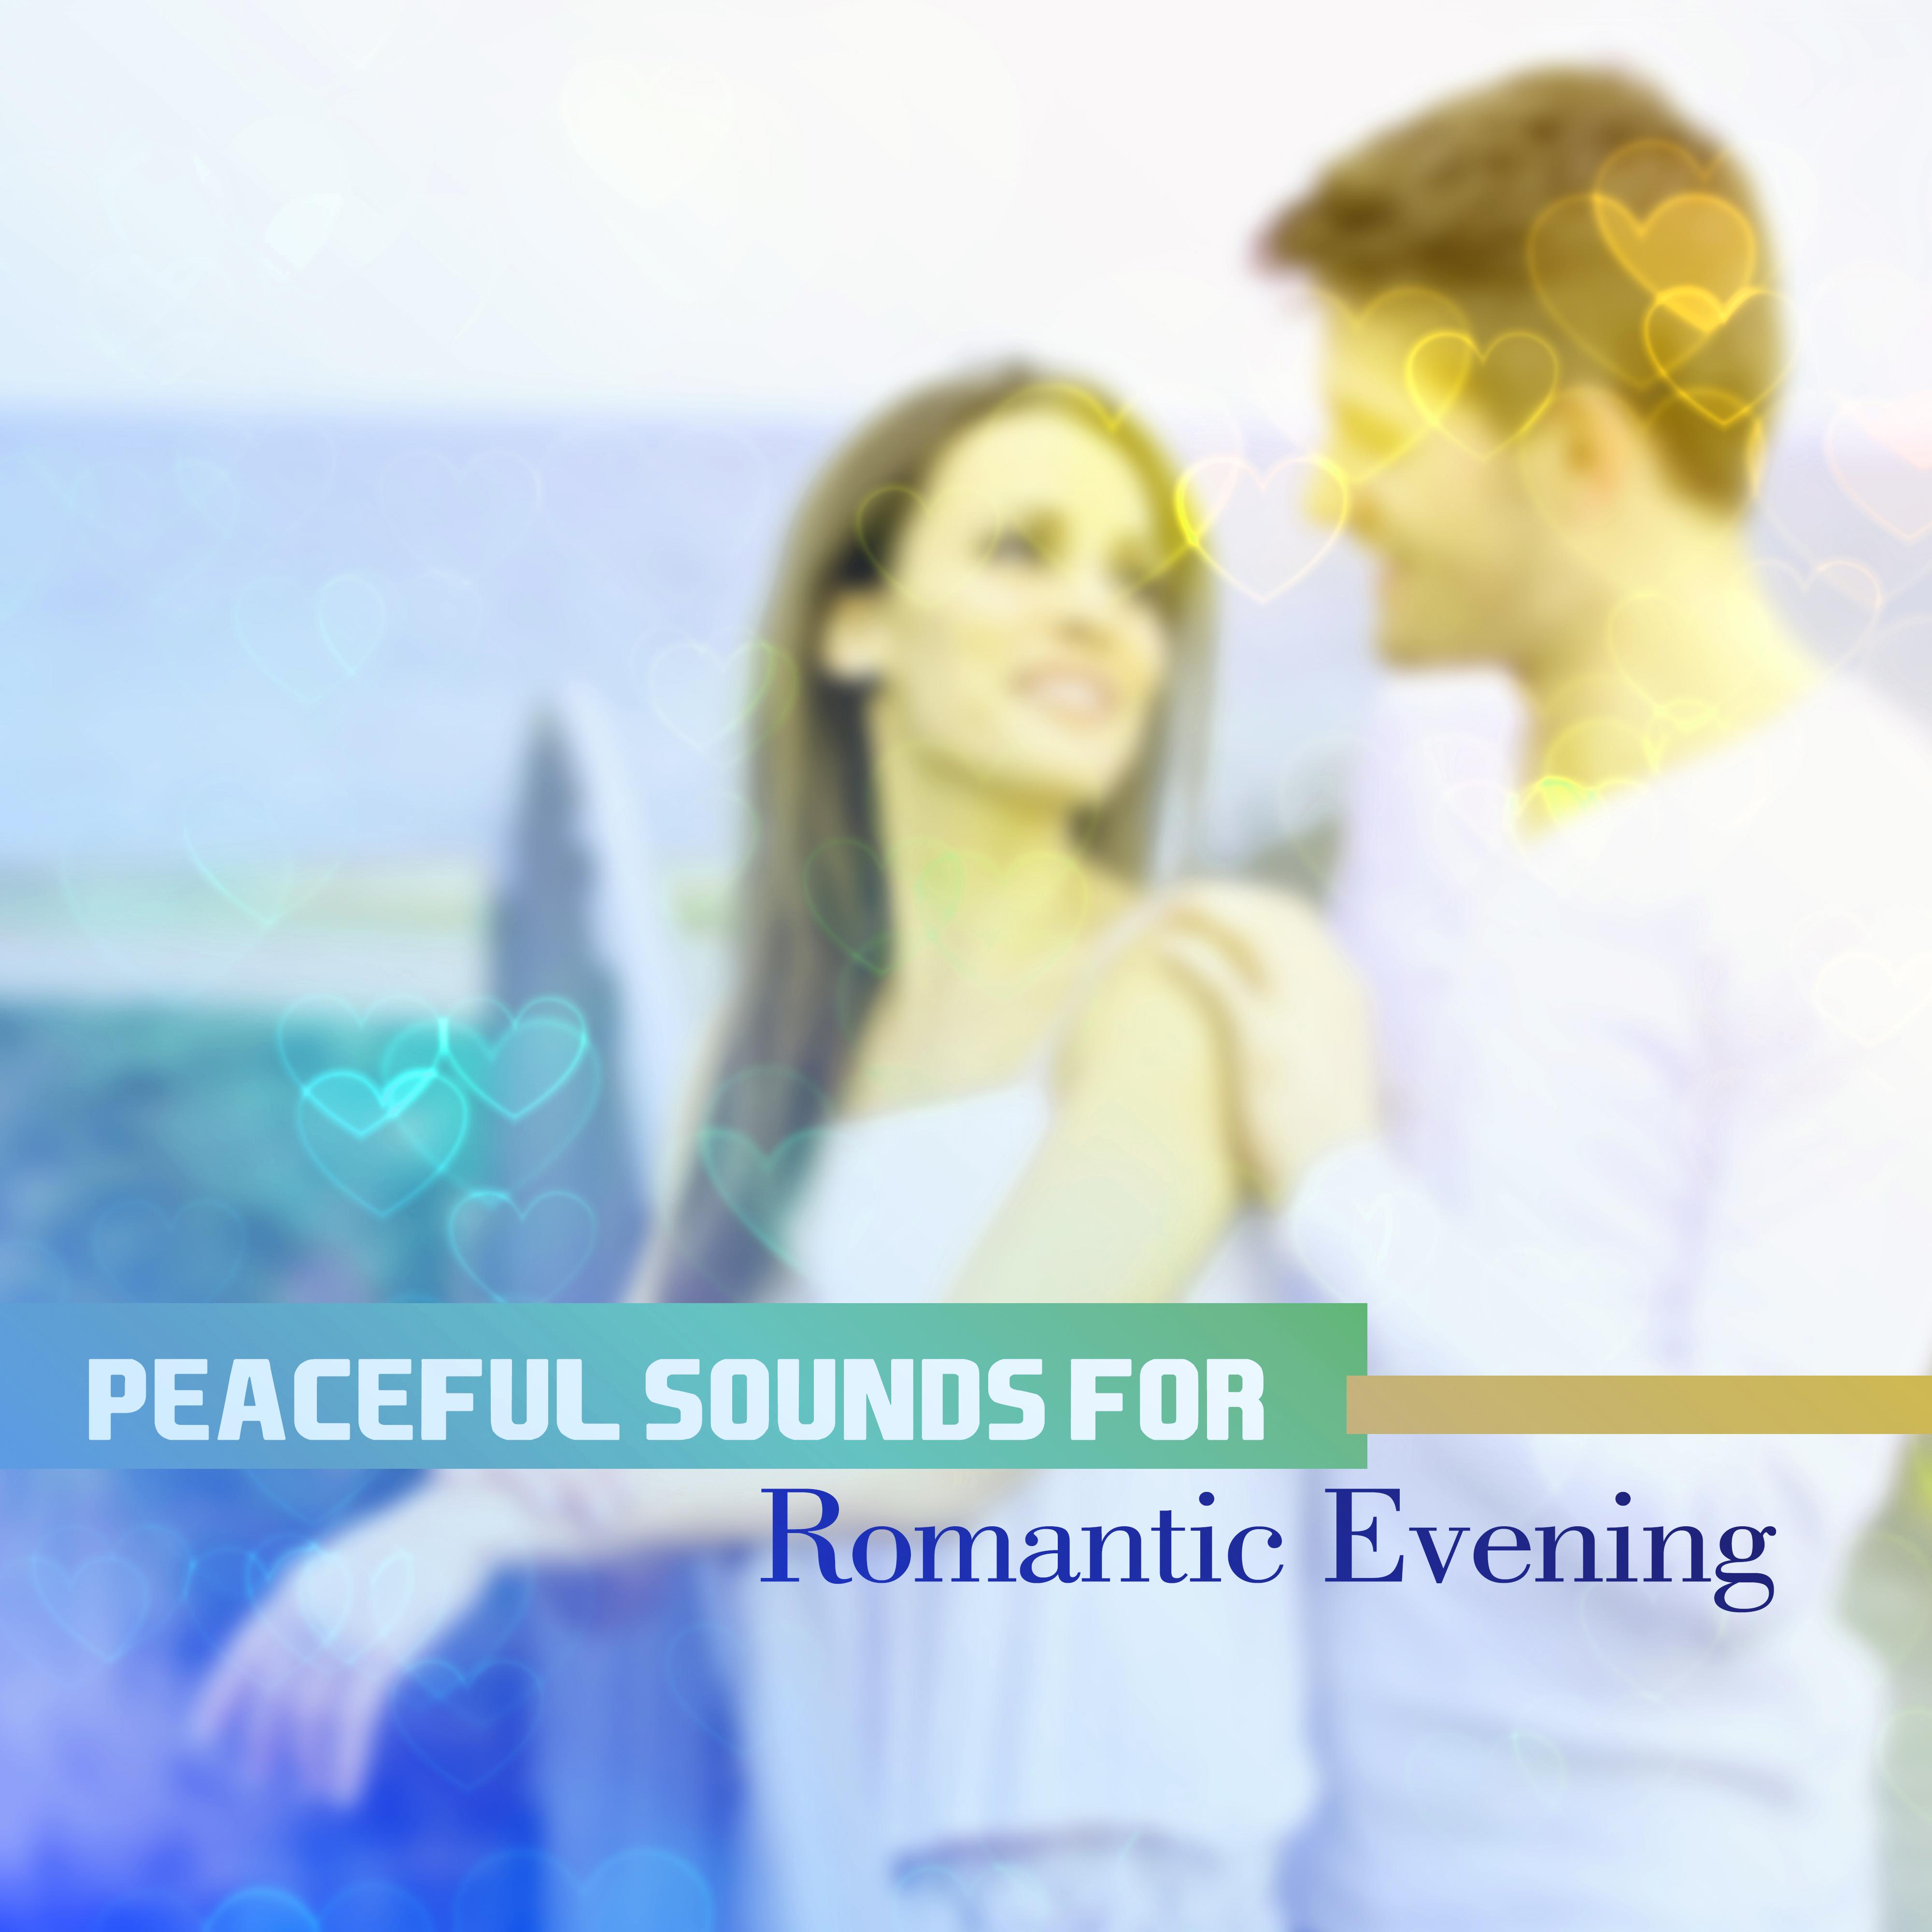 Peaceful Sounds for Romantic Evening  Inner Peace, Romance Night, Erotic Lovers, Music to Rest